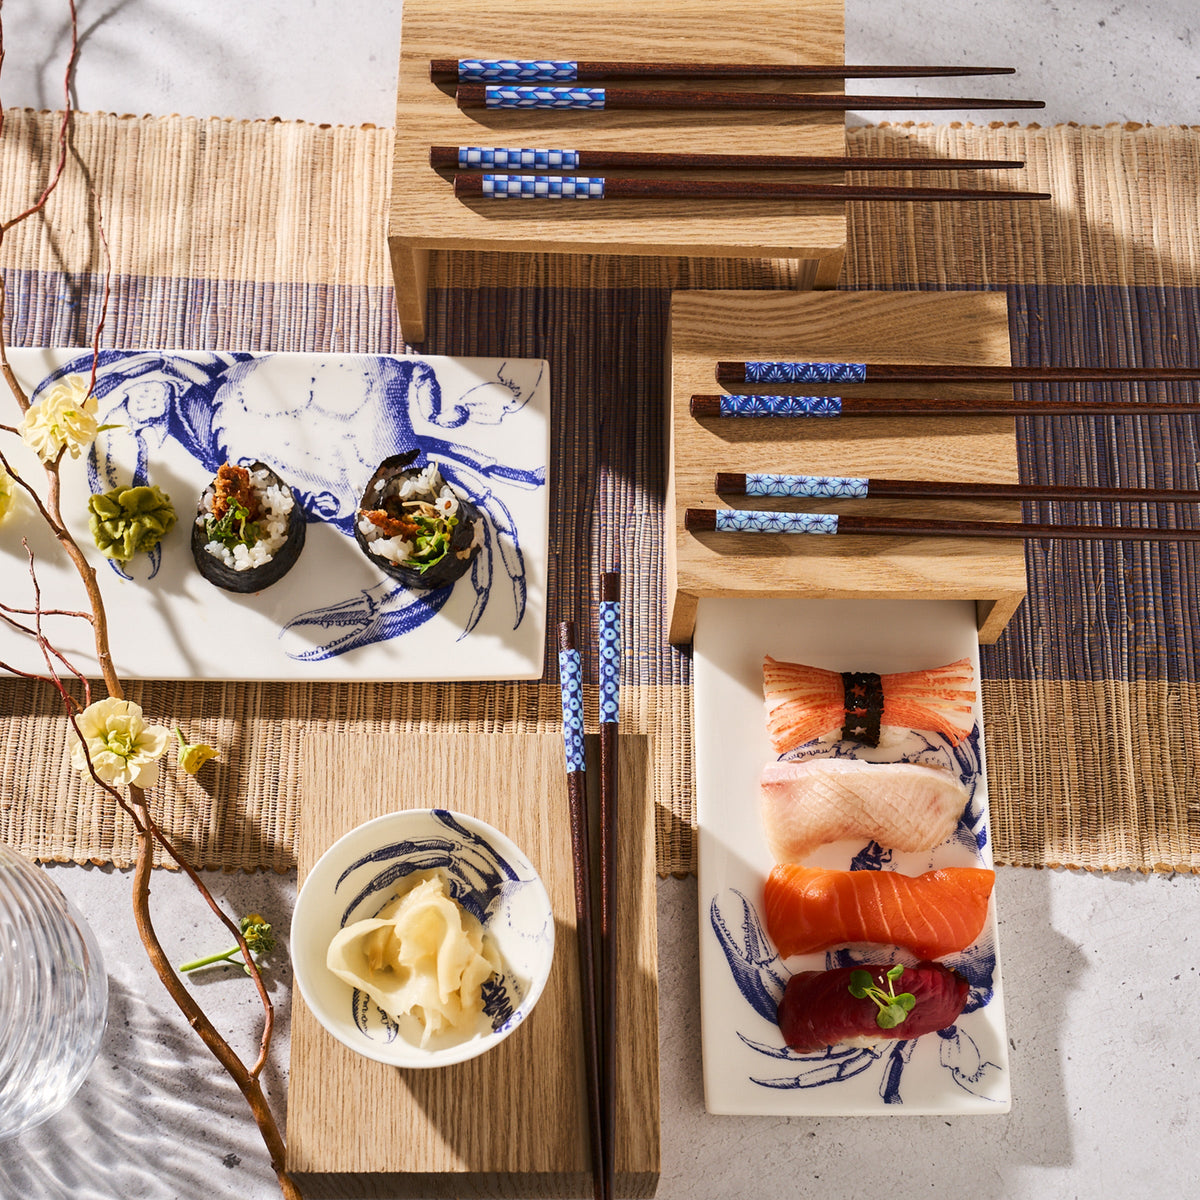 Japanese Crab Sushi Tray Set of 2 and chopsticks on a wooden table with sushi trays, brought to you by Caskata.